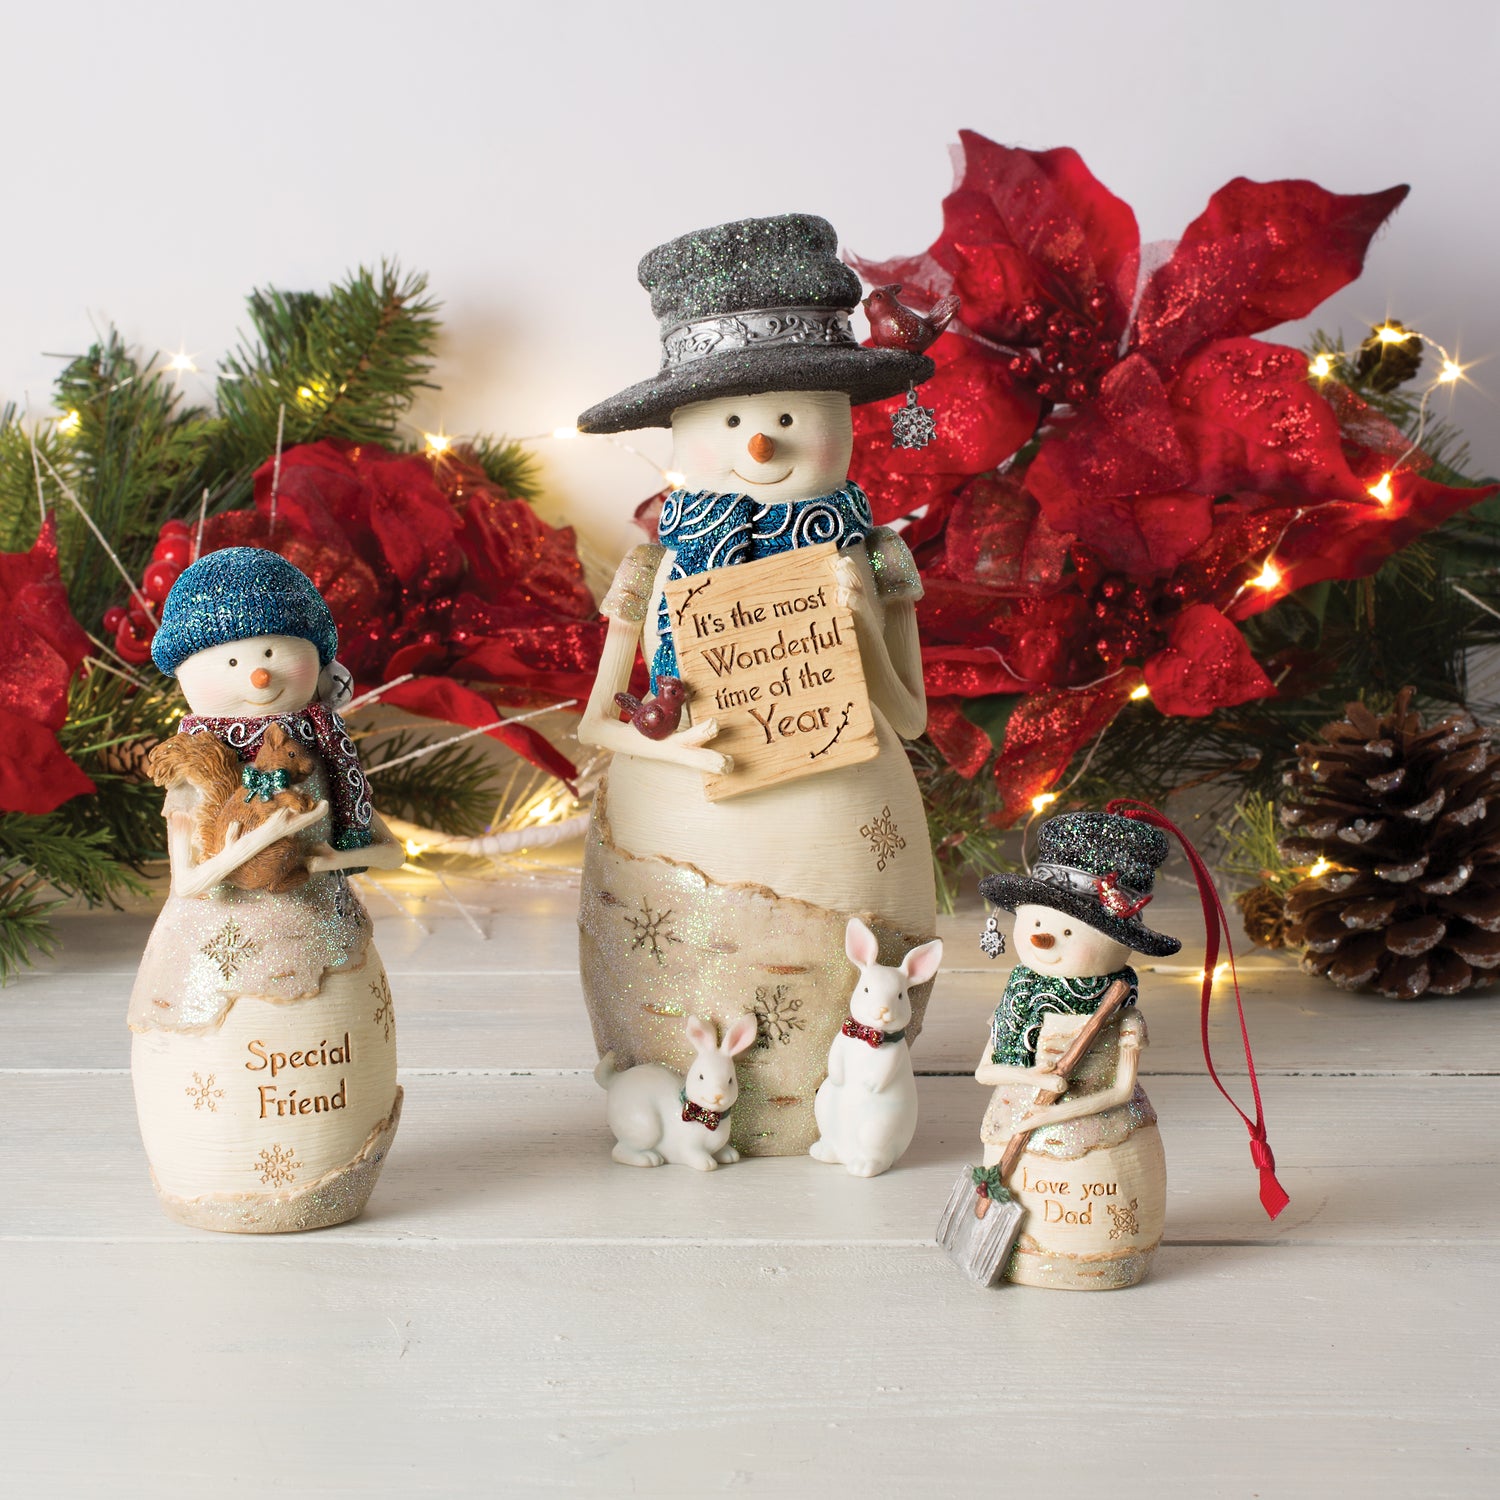 It's the most wonderful time of the year Snowman Holding Sign Figurine Snowman Figurine - Beloved Gift Shop